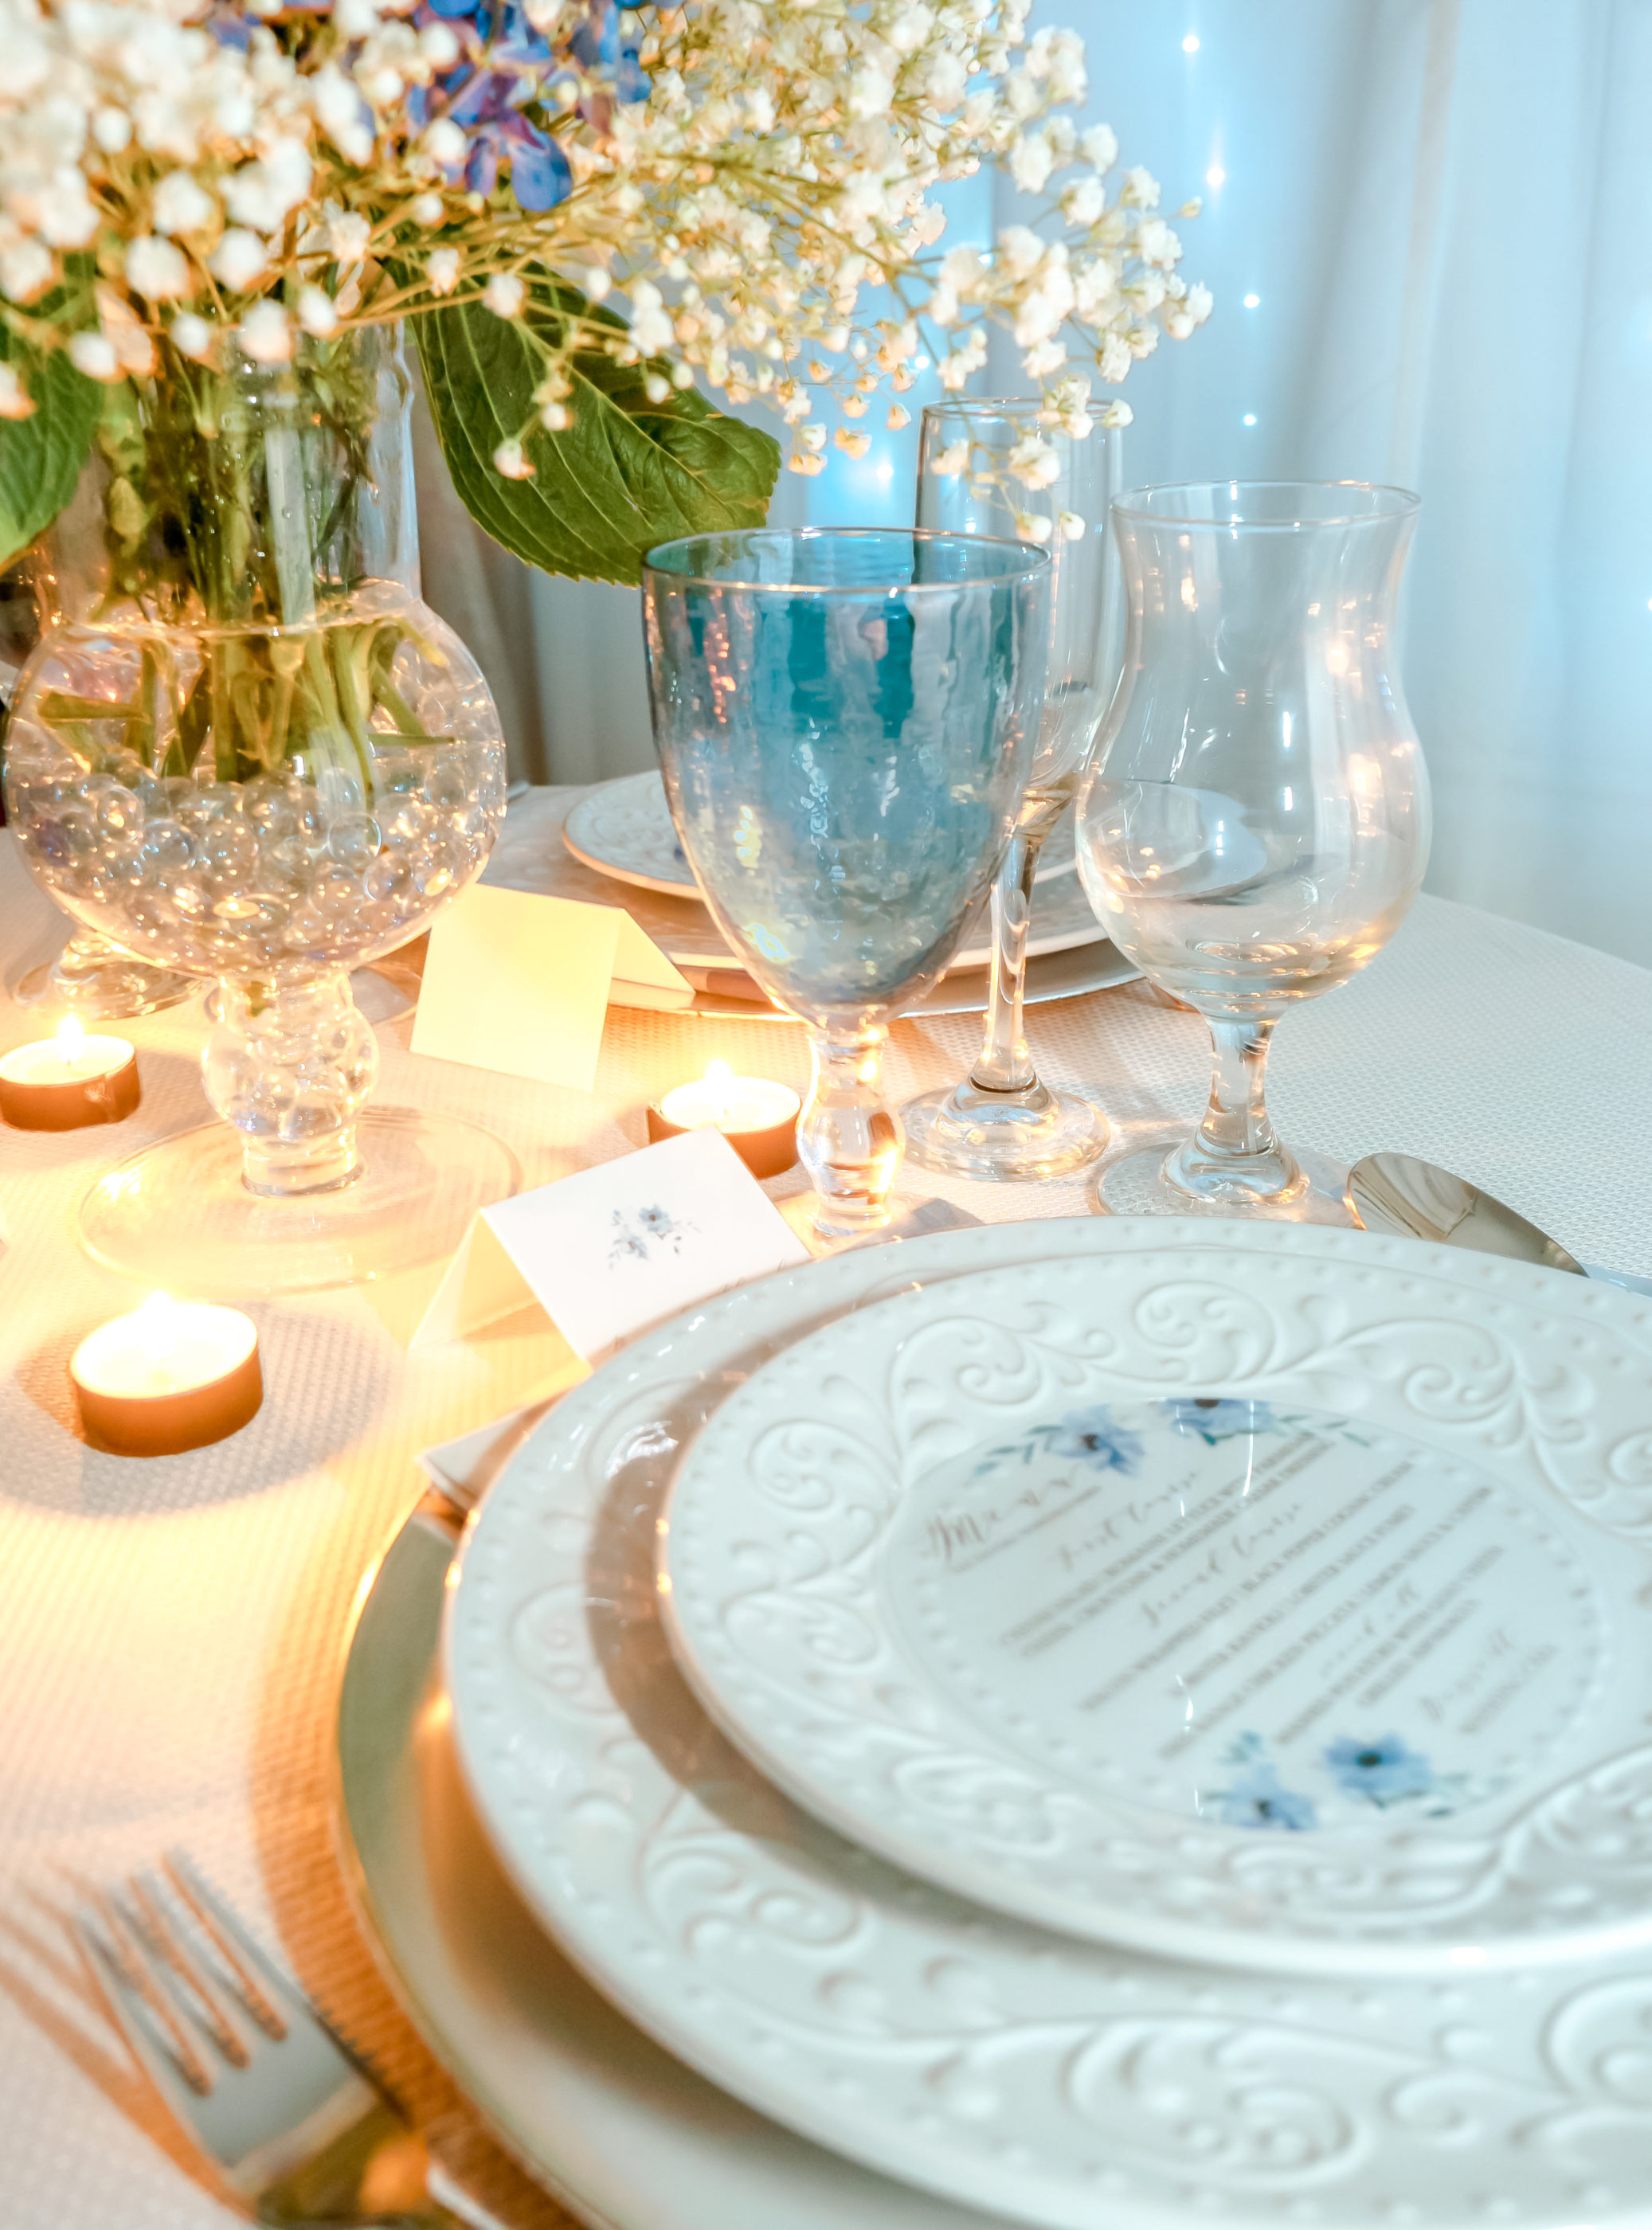 reception table with place setting, candles, stemware, and floral centerpiece